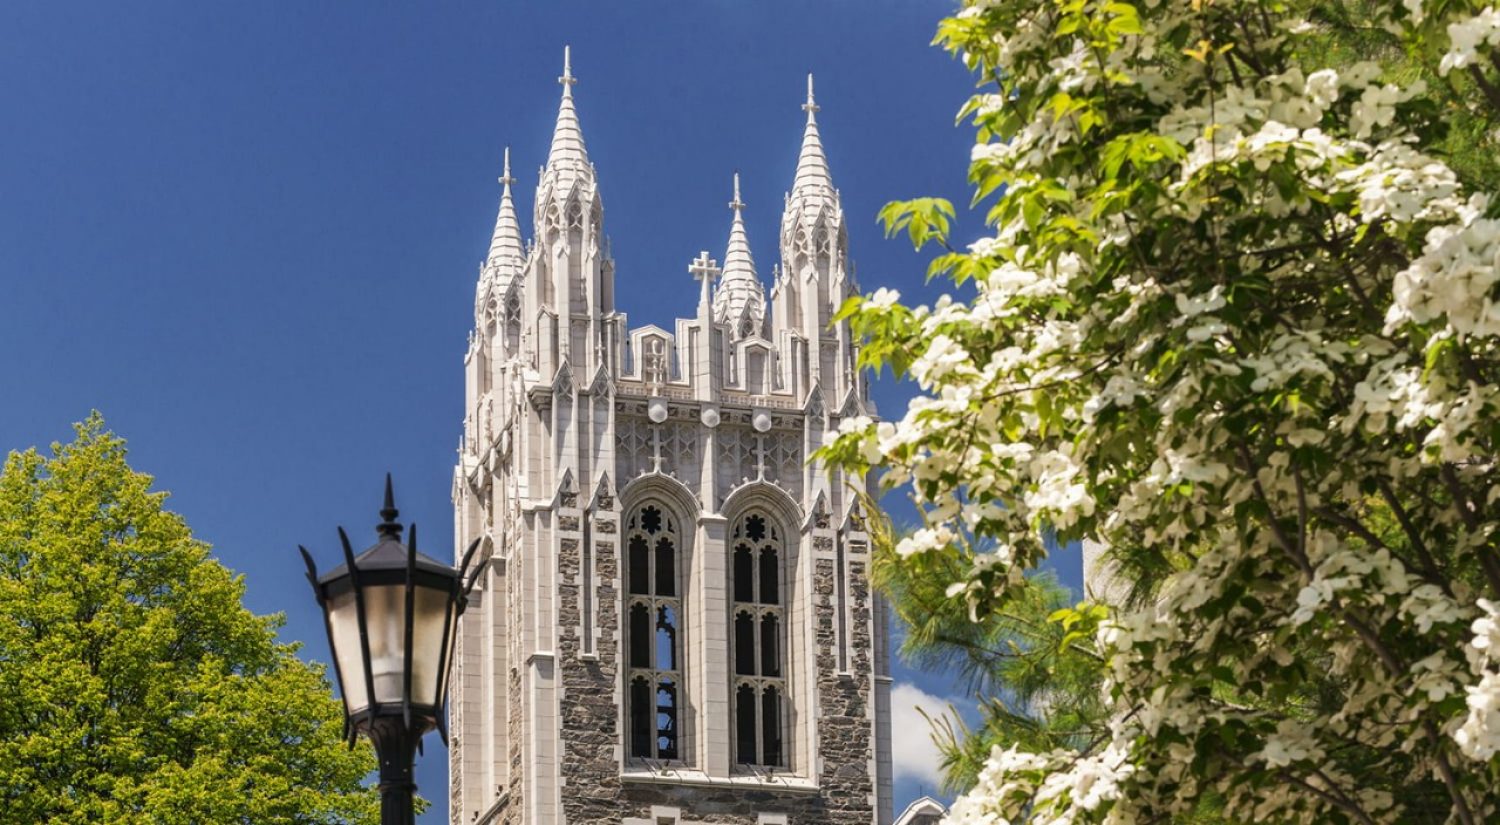 Gasson Hall in springtime